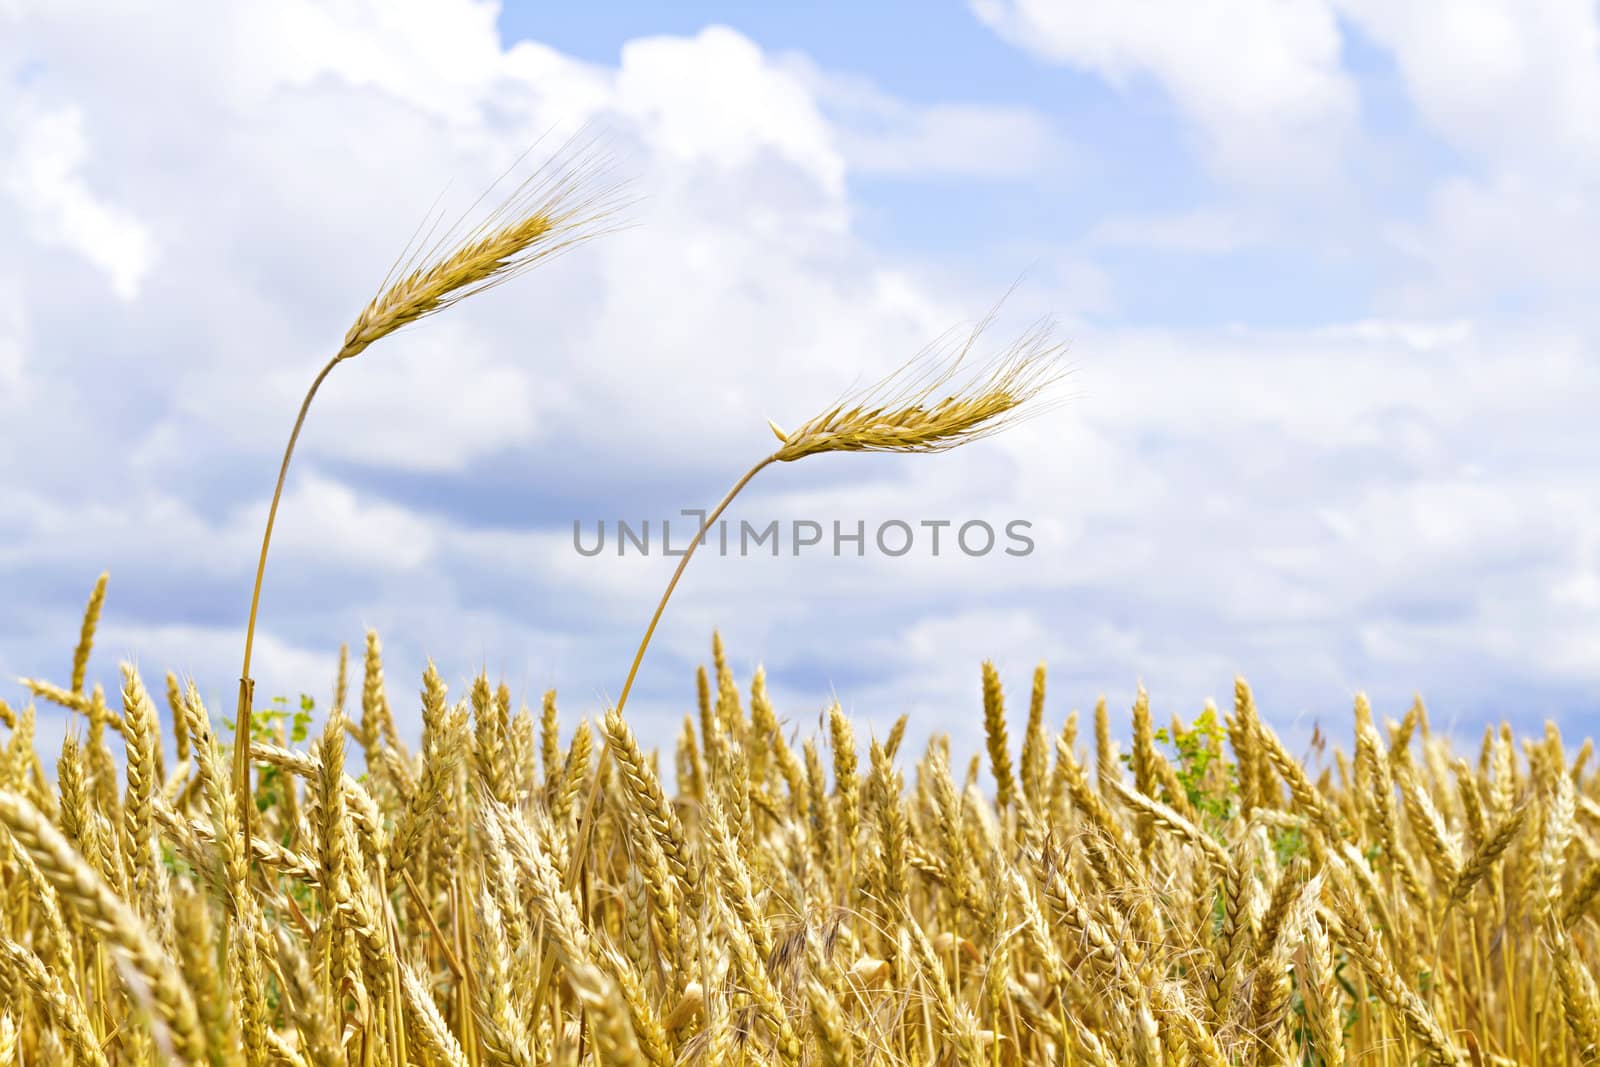 ears of wheat against the sky with clouds